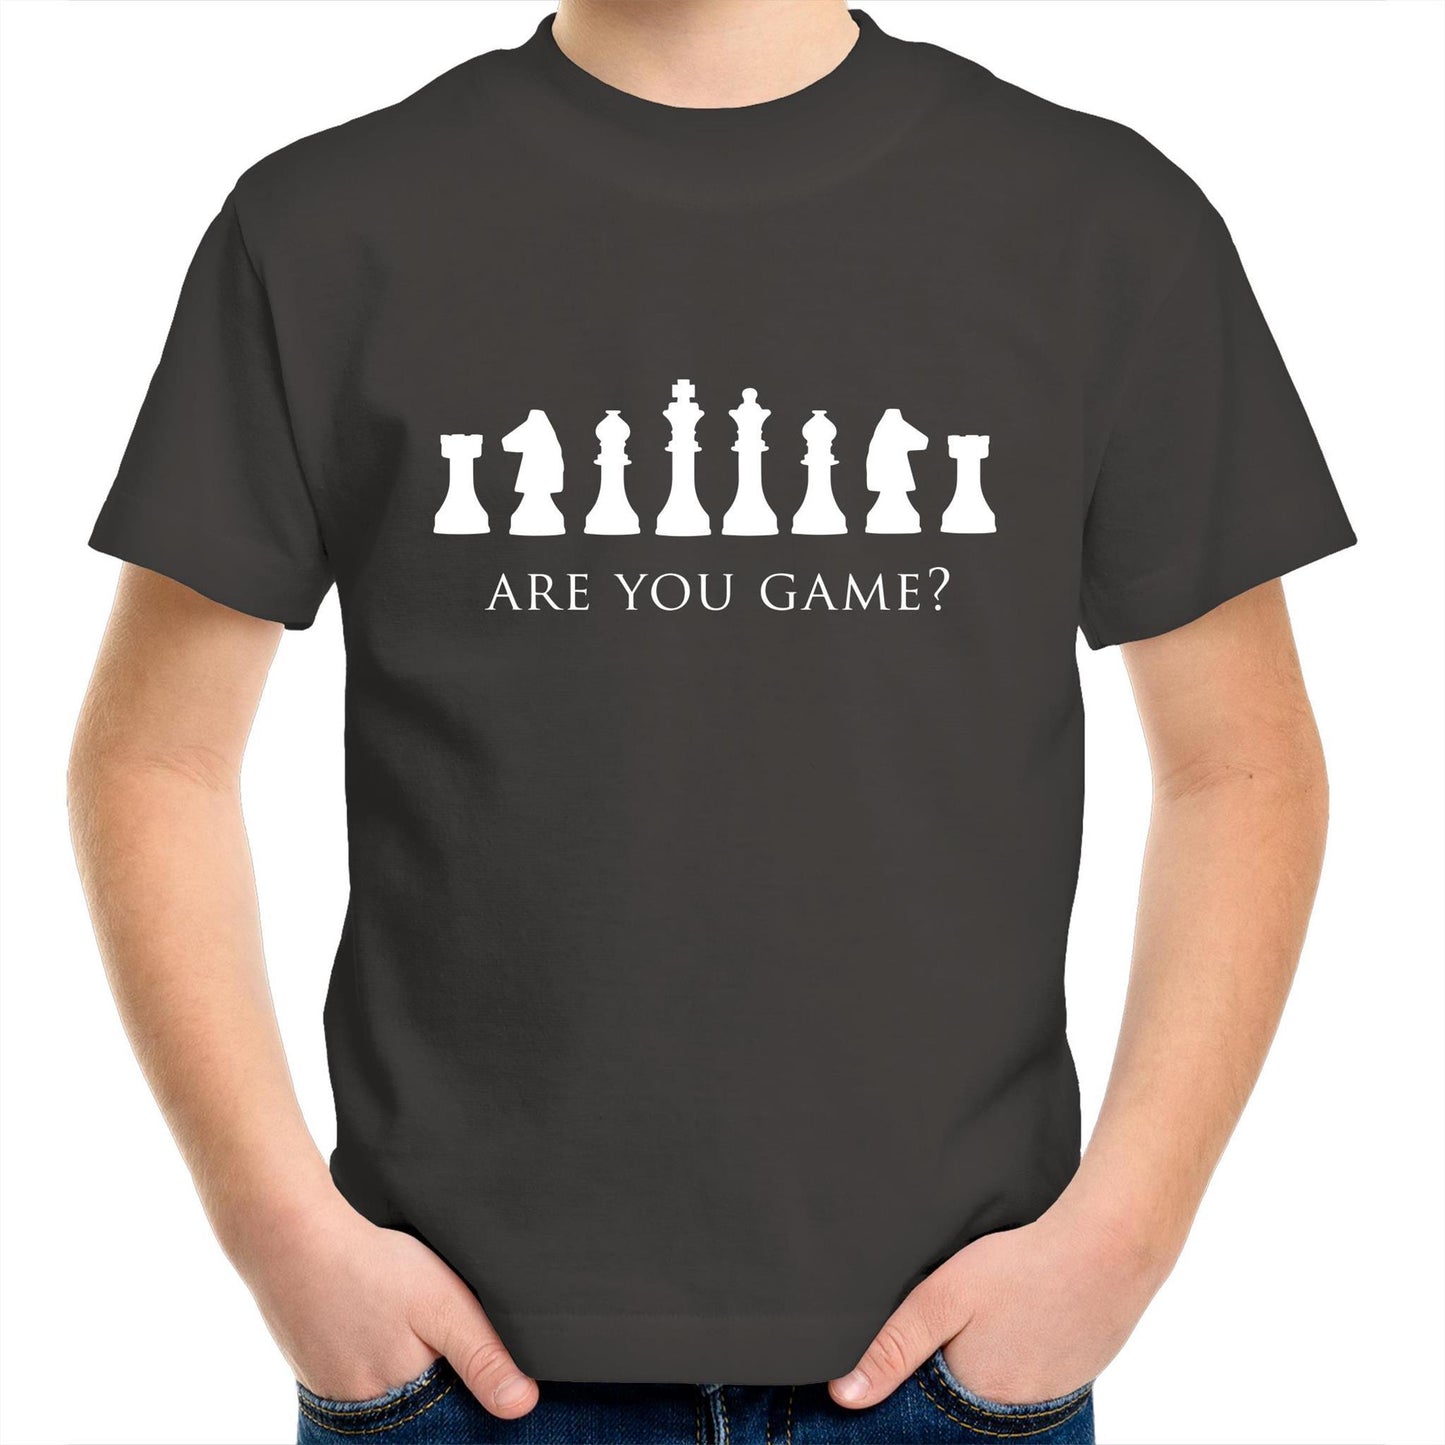 Are You Game - Kids Youth Crew T-shirt Charcoal Kids Youth T-shirt Chess